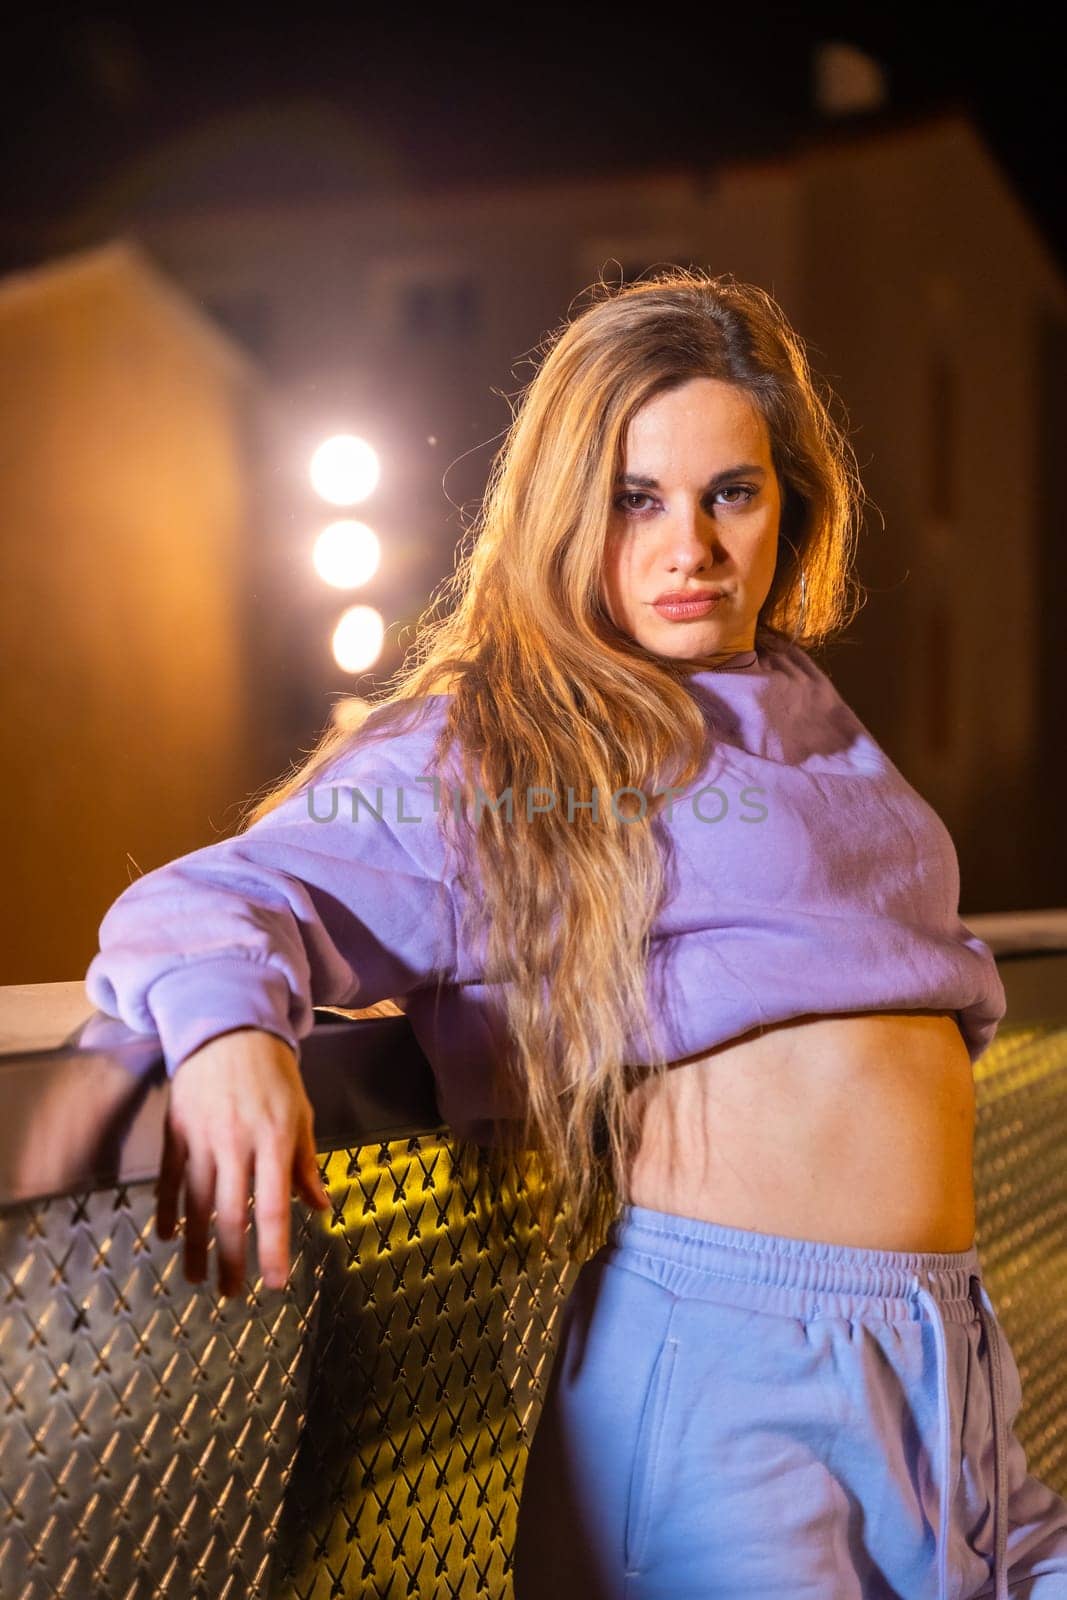 Vertical portrait of a blonde female rude trap dancer posing in the street at night